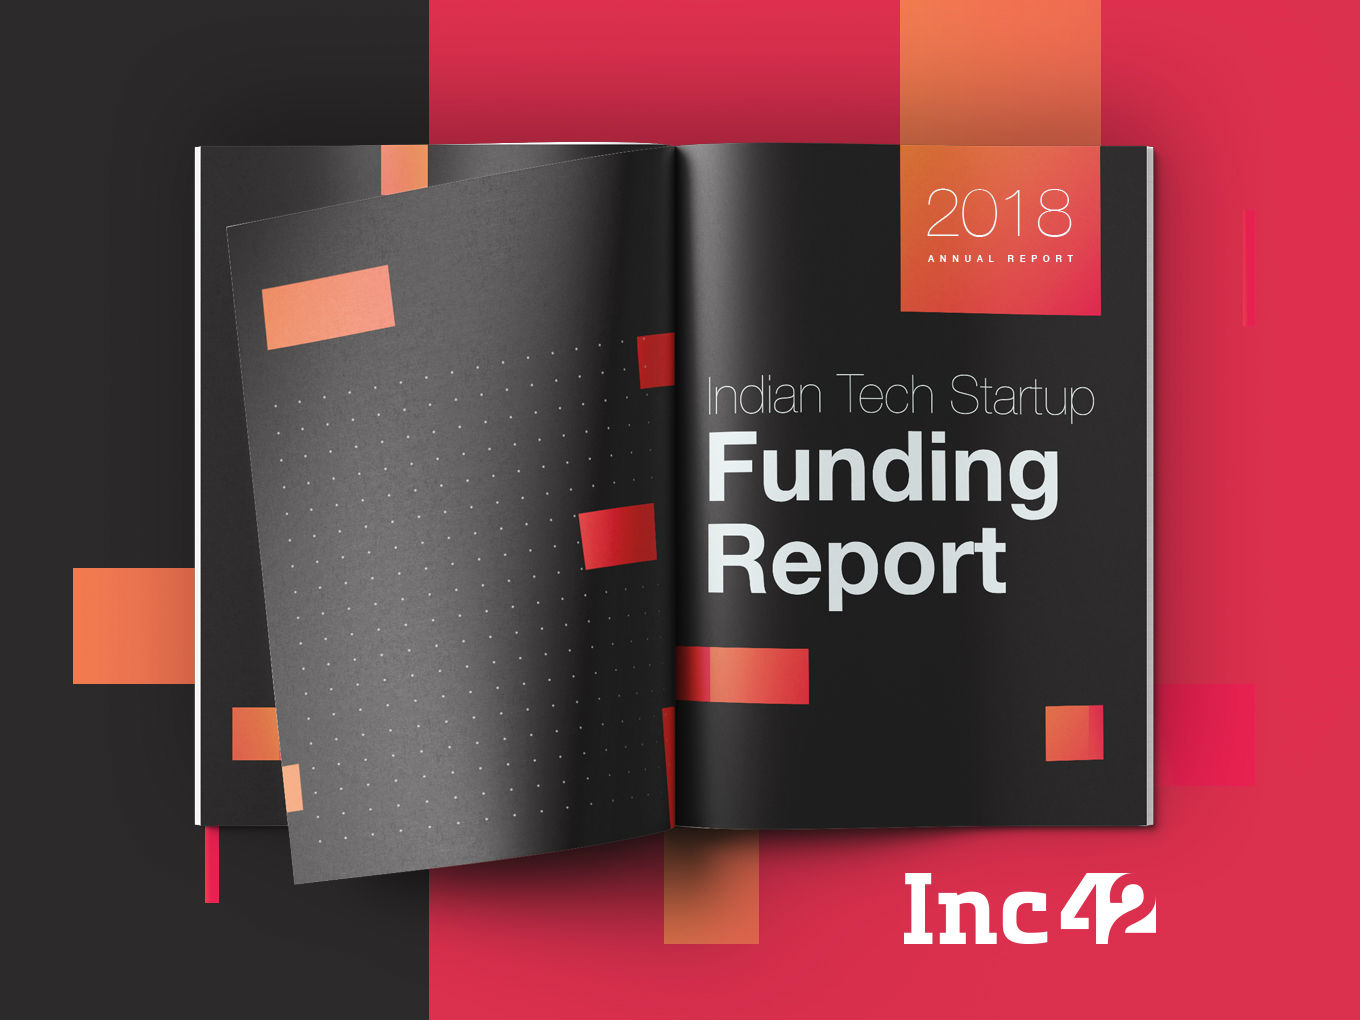 2018 A Landmark Year For Tech Startups With $11 Bn In Funding, 743 Deals And 11 Indian Unicorns